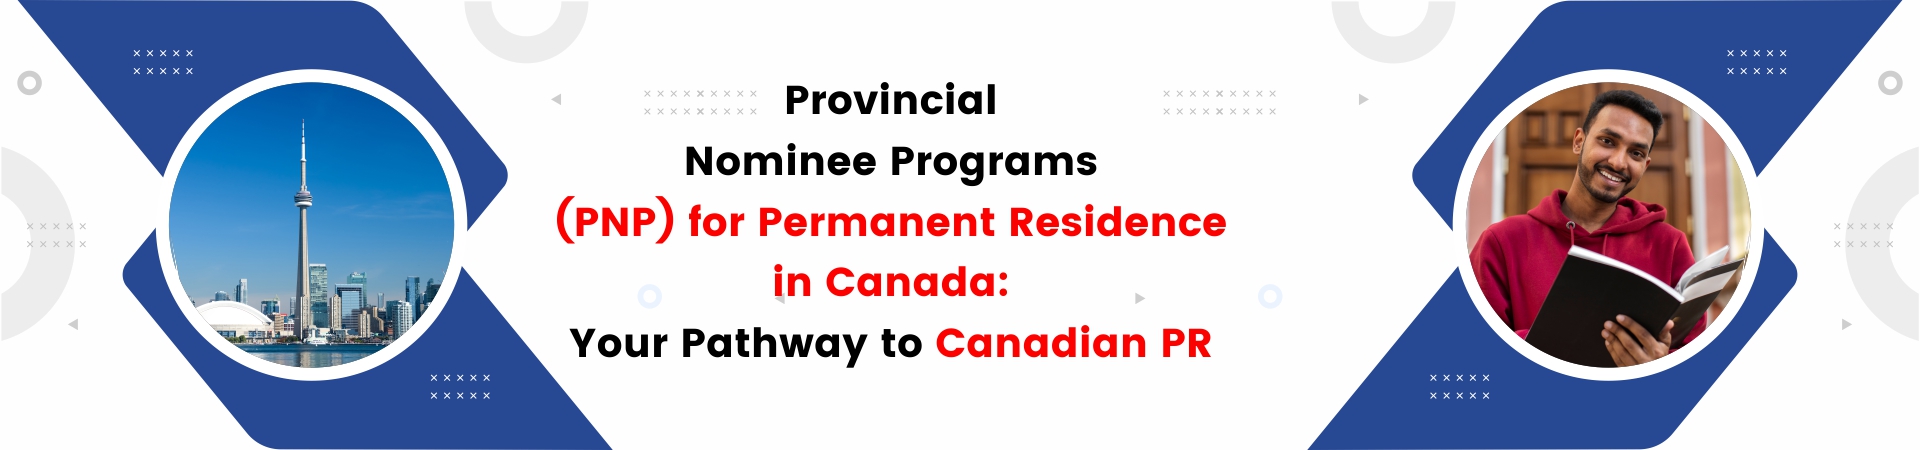 Provincial Nominee Programs (PNP) for Permanent Residence in Canada: Your Pathway to Canadian PR